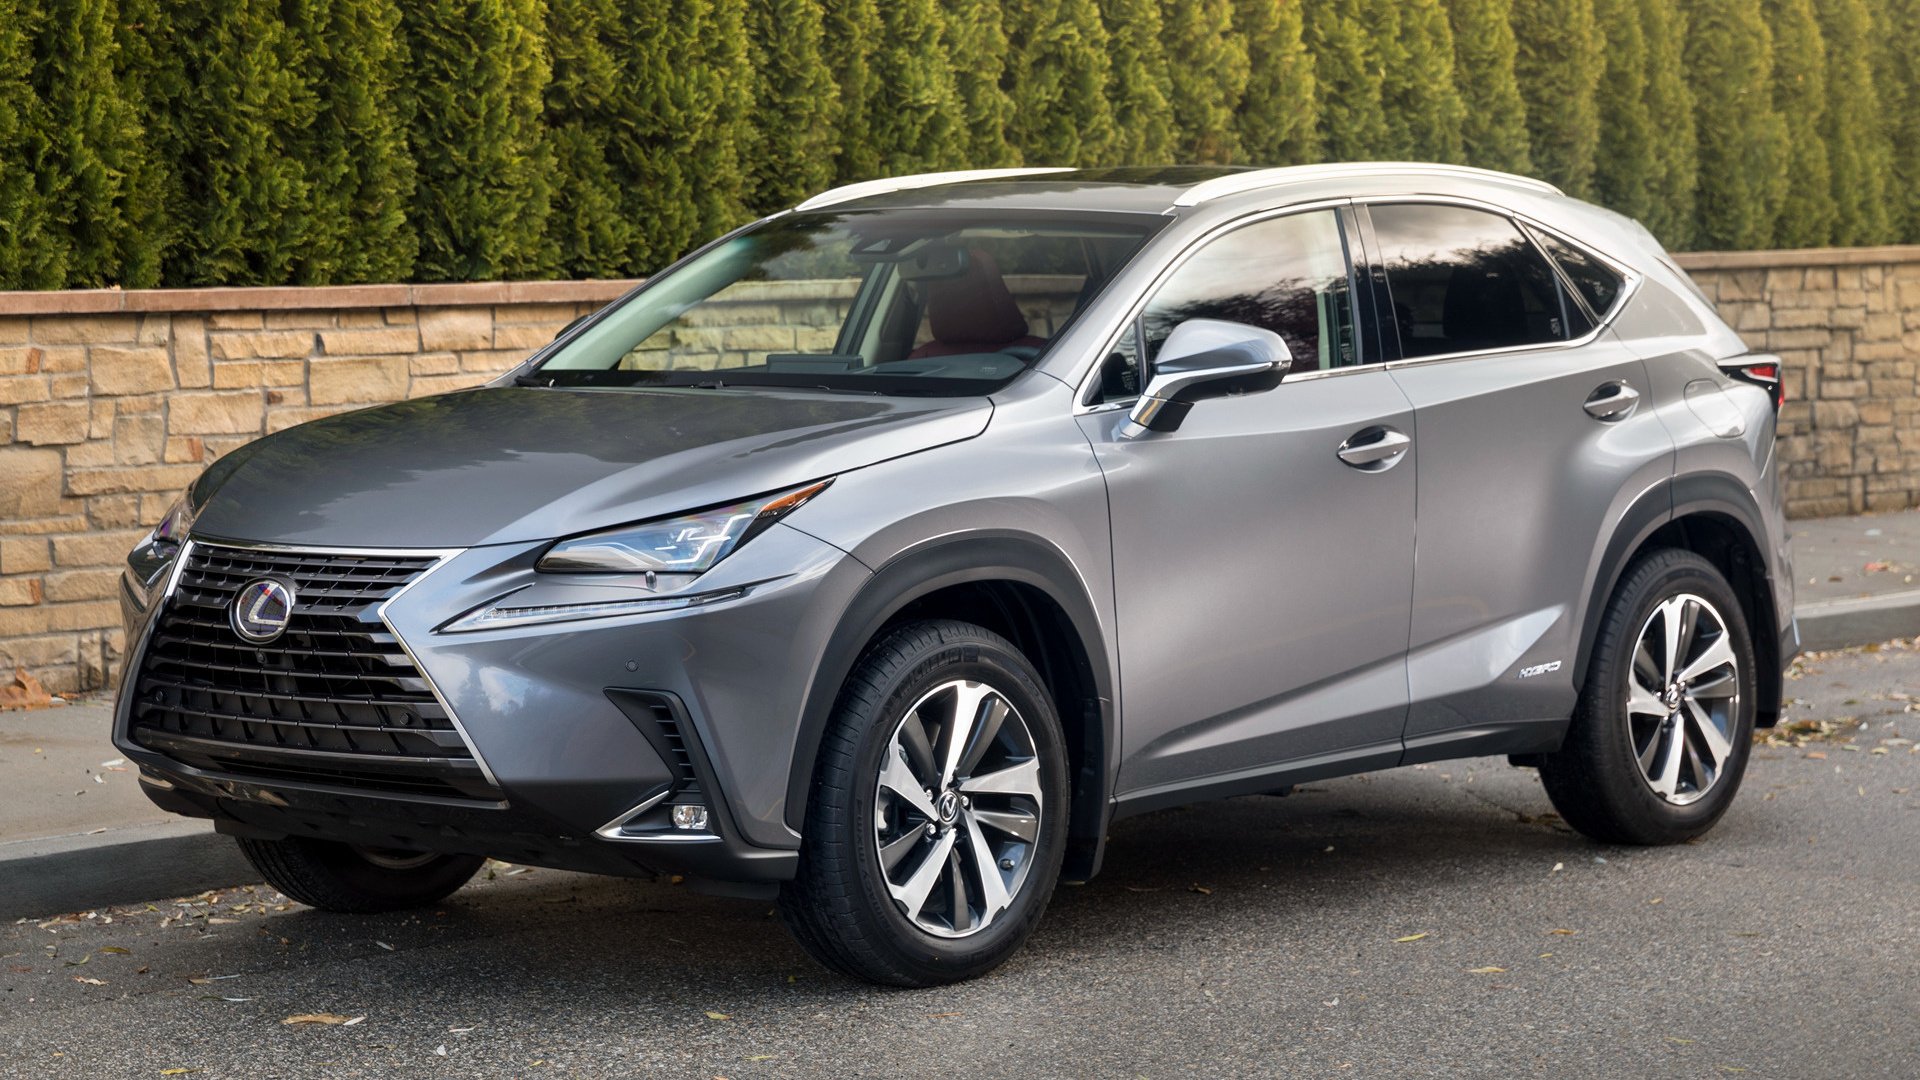 2018 Lexus NX Hybrid (US) Wallpapers and HD Images Car